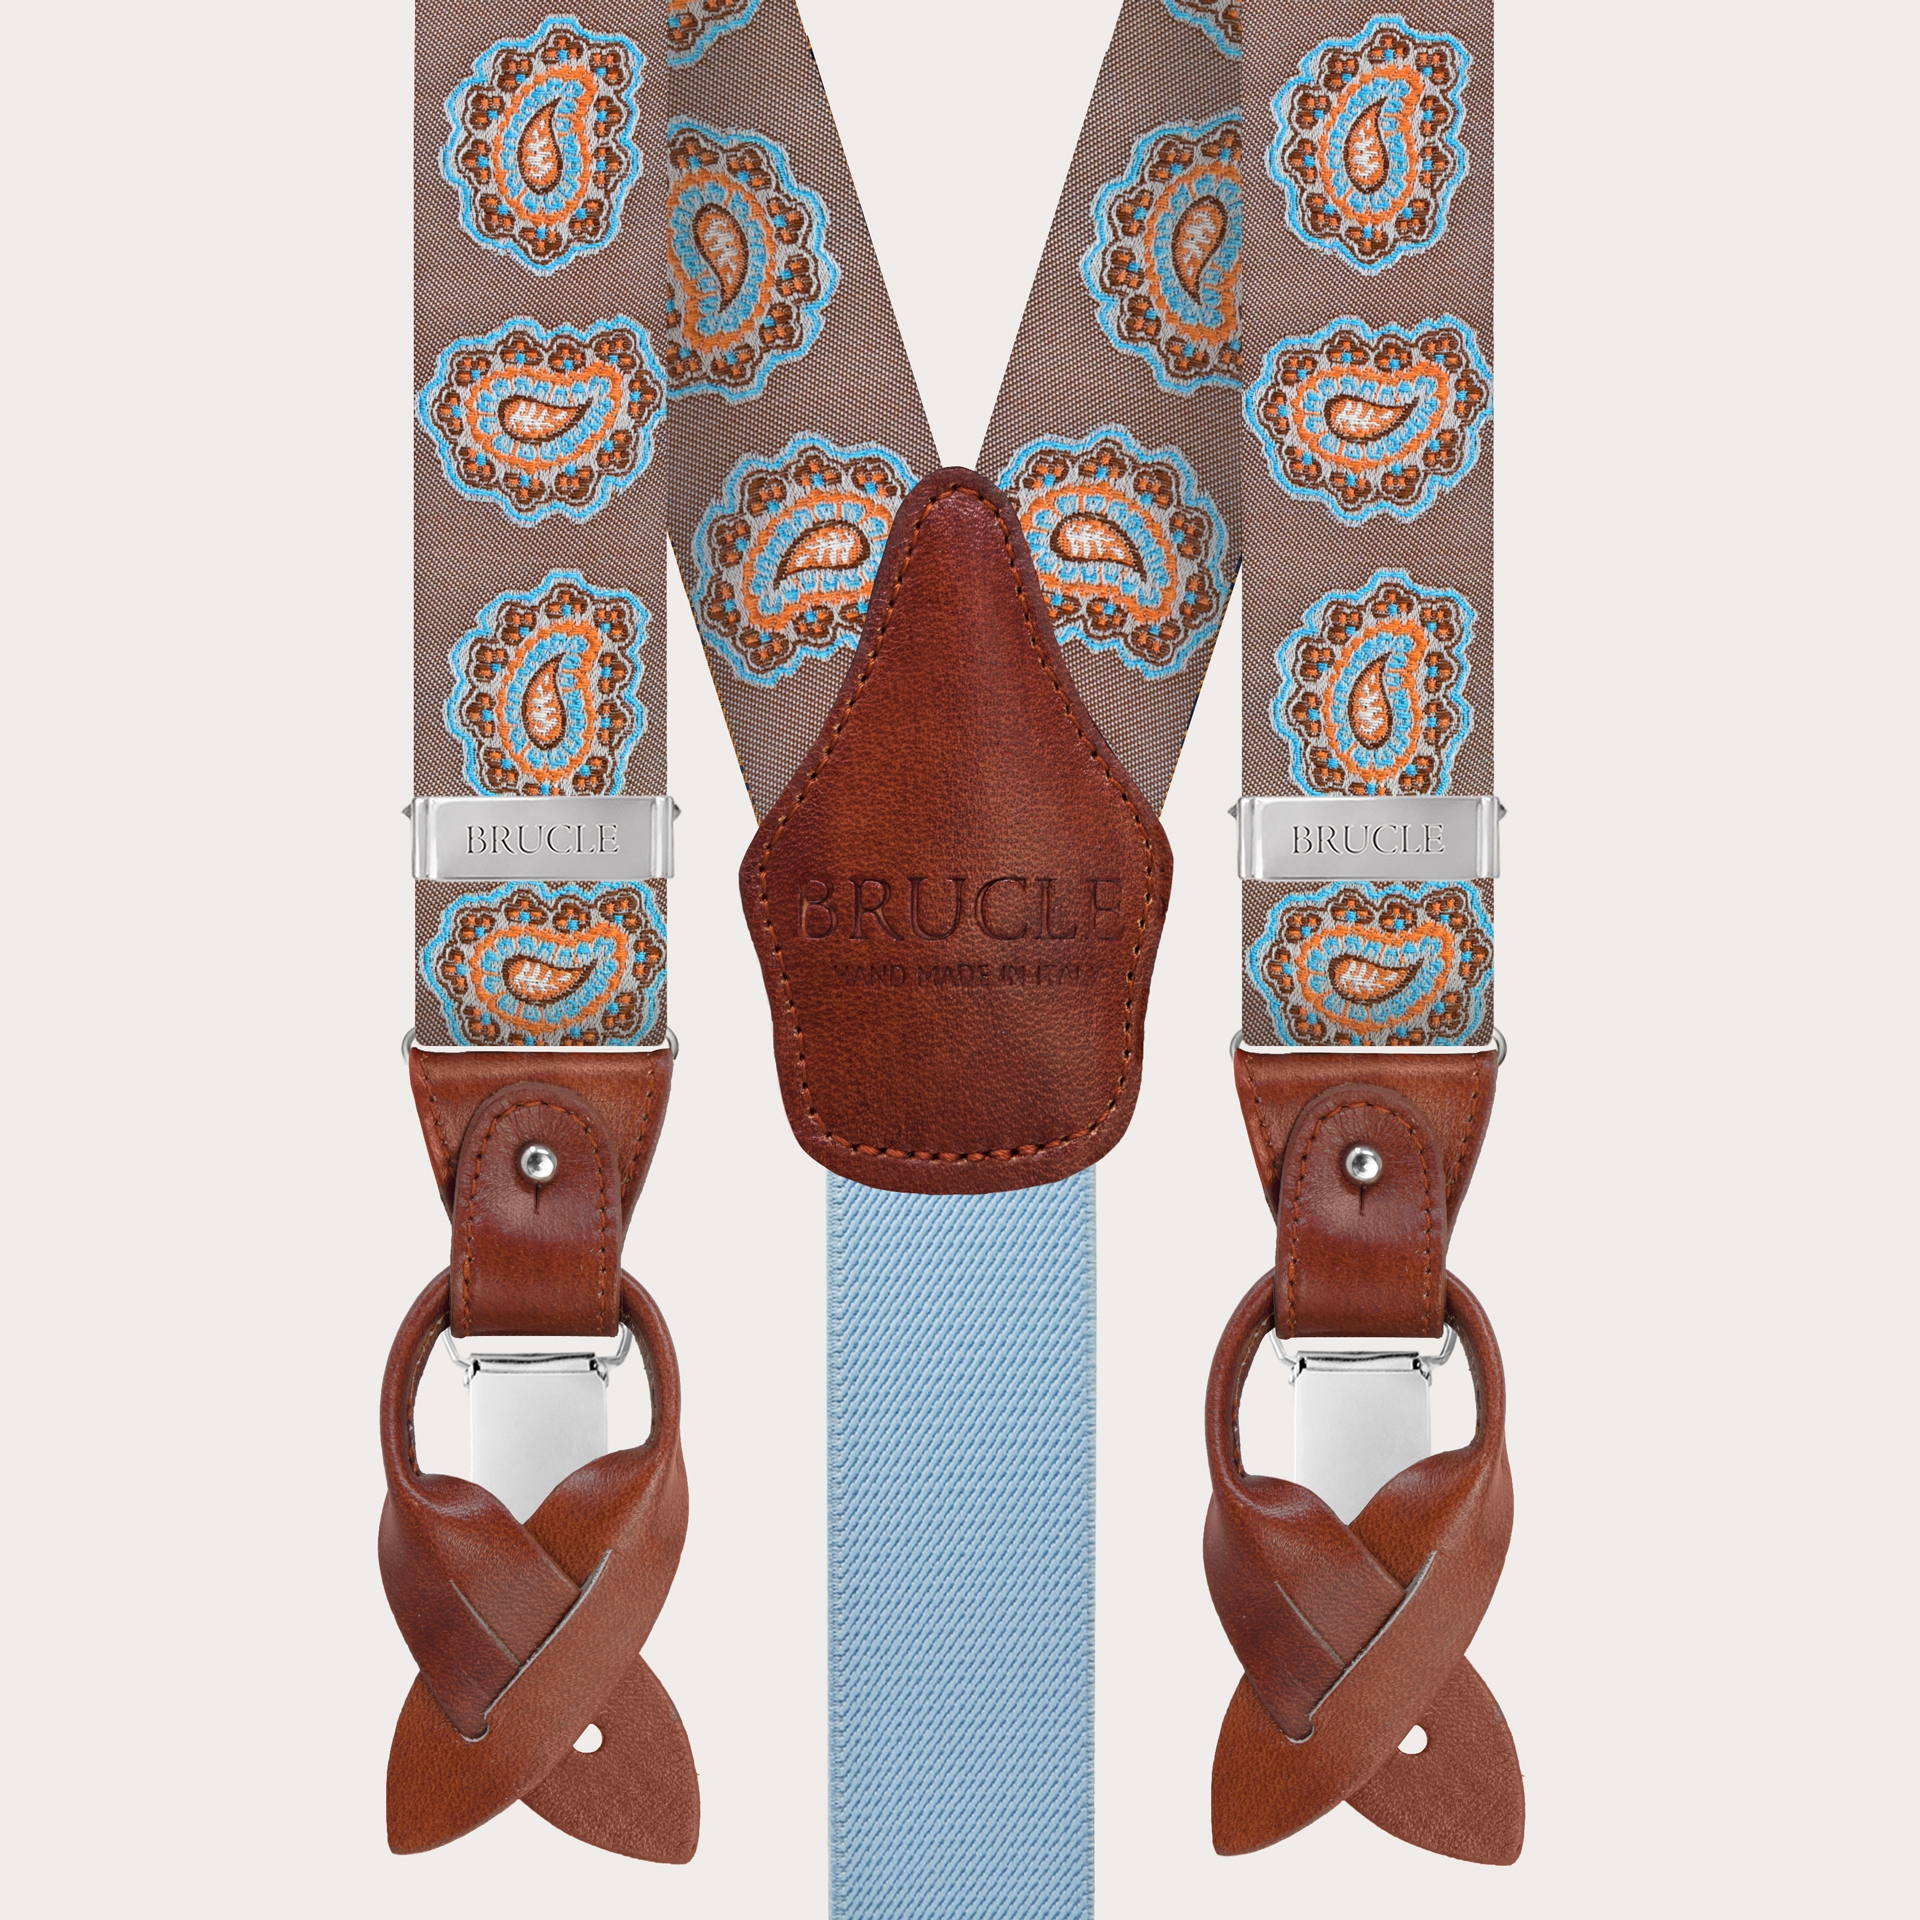 Silk suspenders with paisley pattern, dove gray